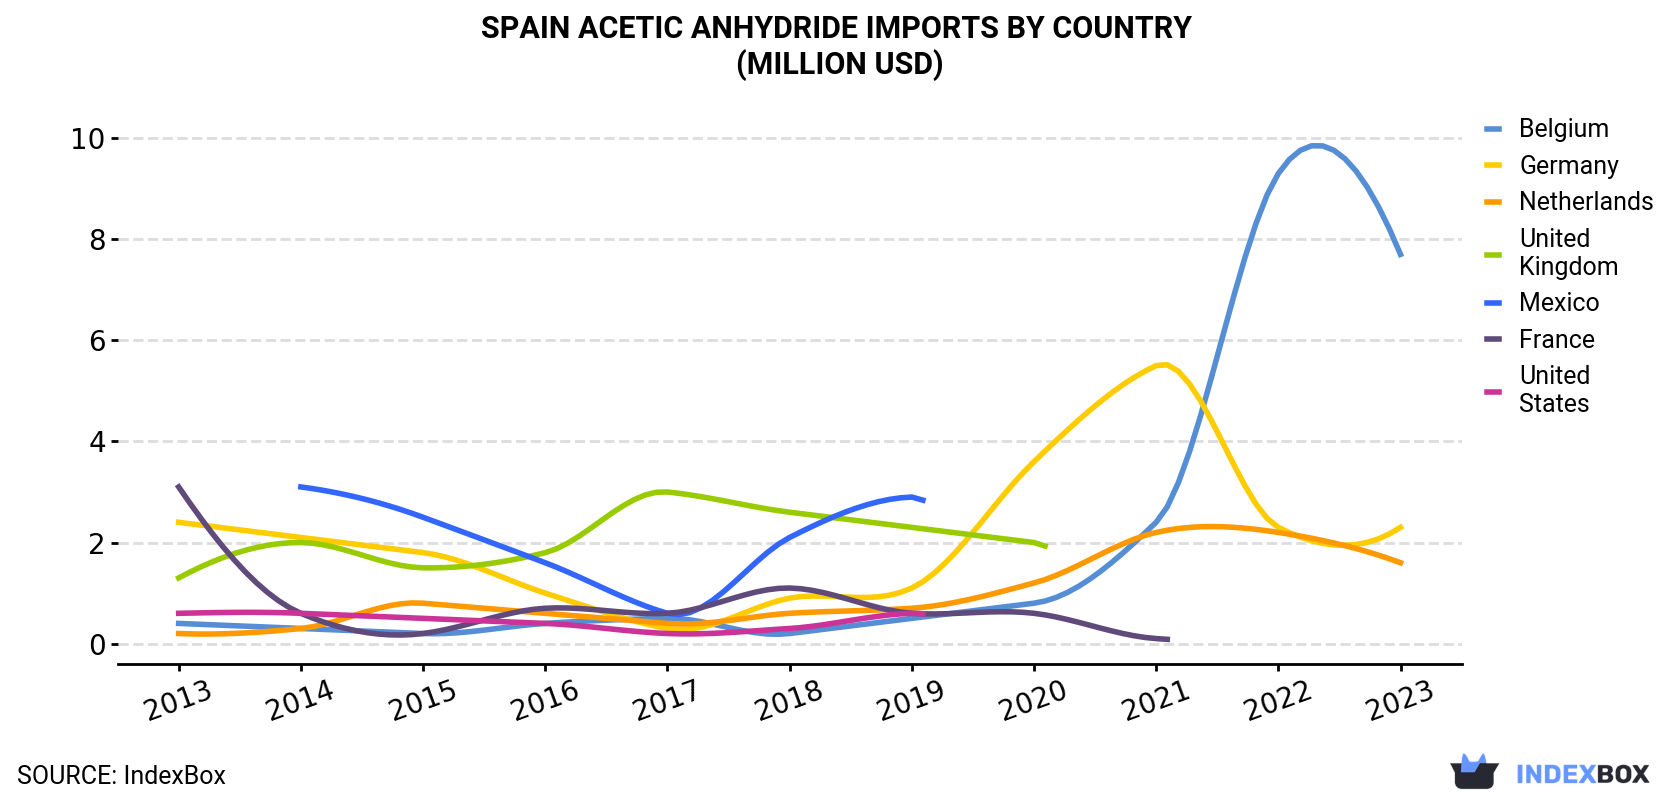 Spain Acetic Anhydride Imports By Country (Million USD)